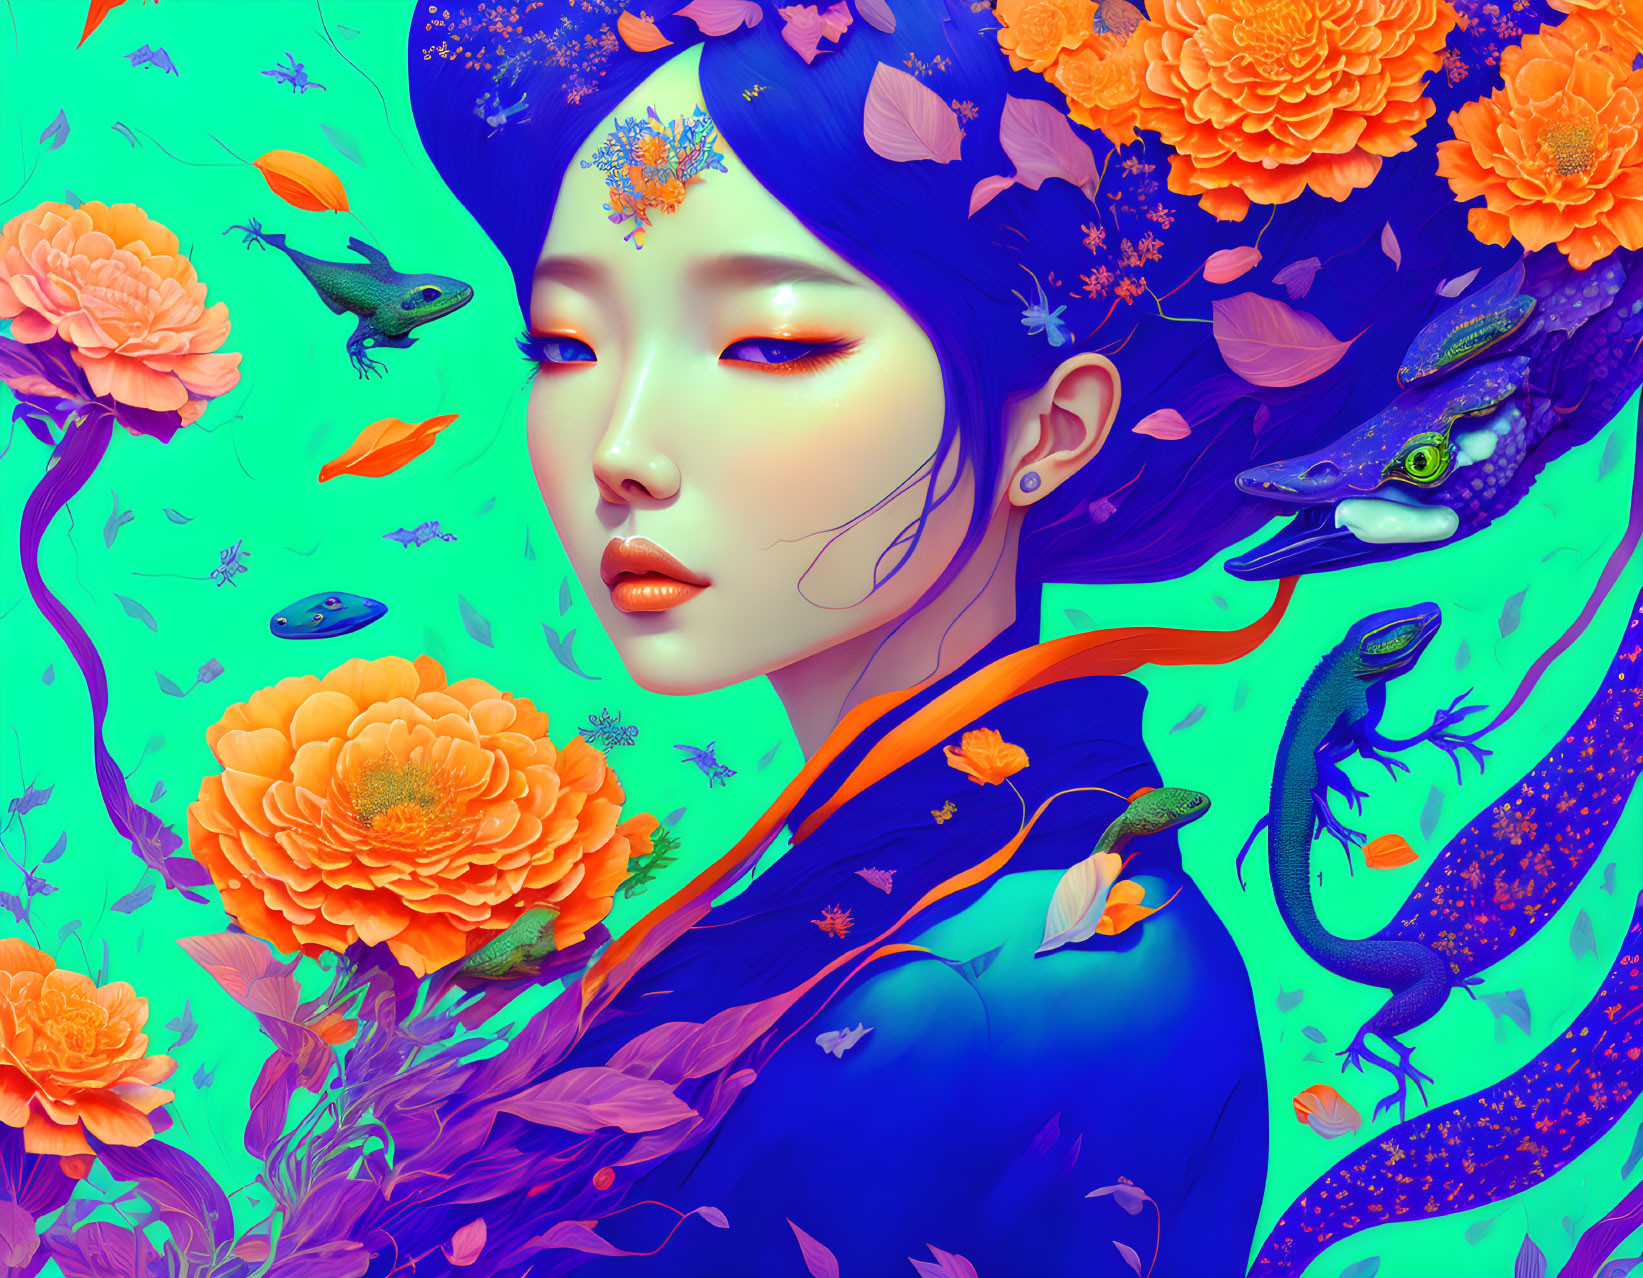 Colorful digital artwork: Woman with blue skin in vibrant, floral setting